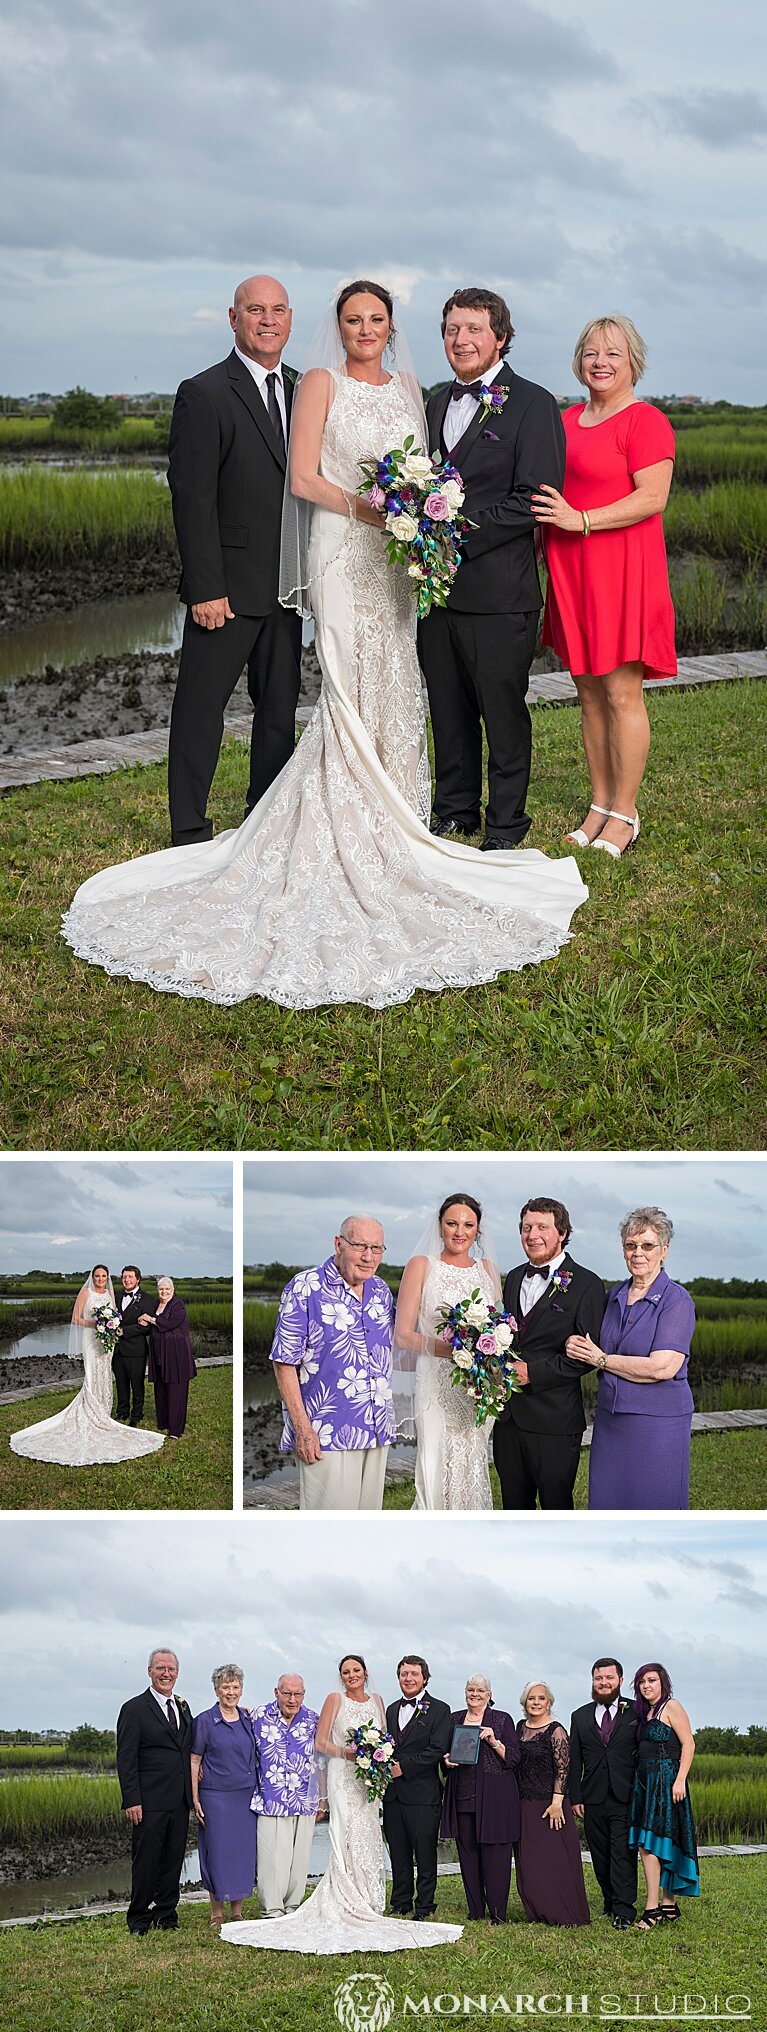 055-Affordable-Wedding-Photographer-in-st-augustine.jpg